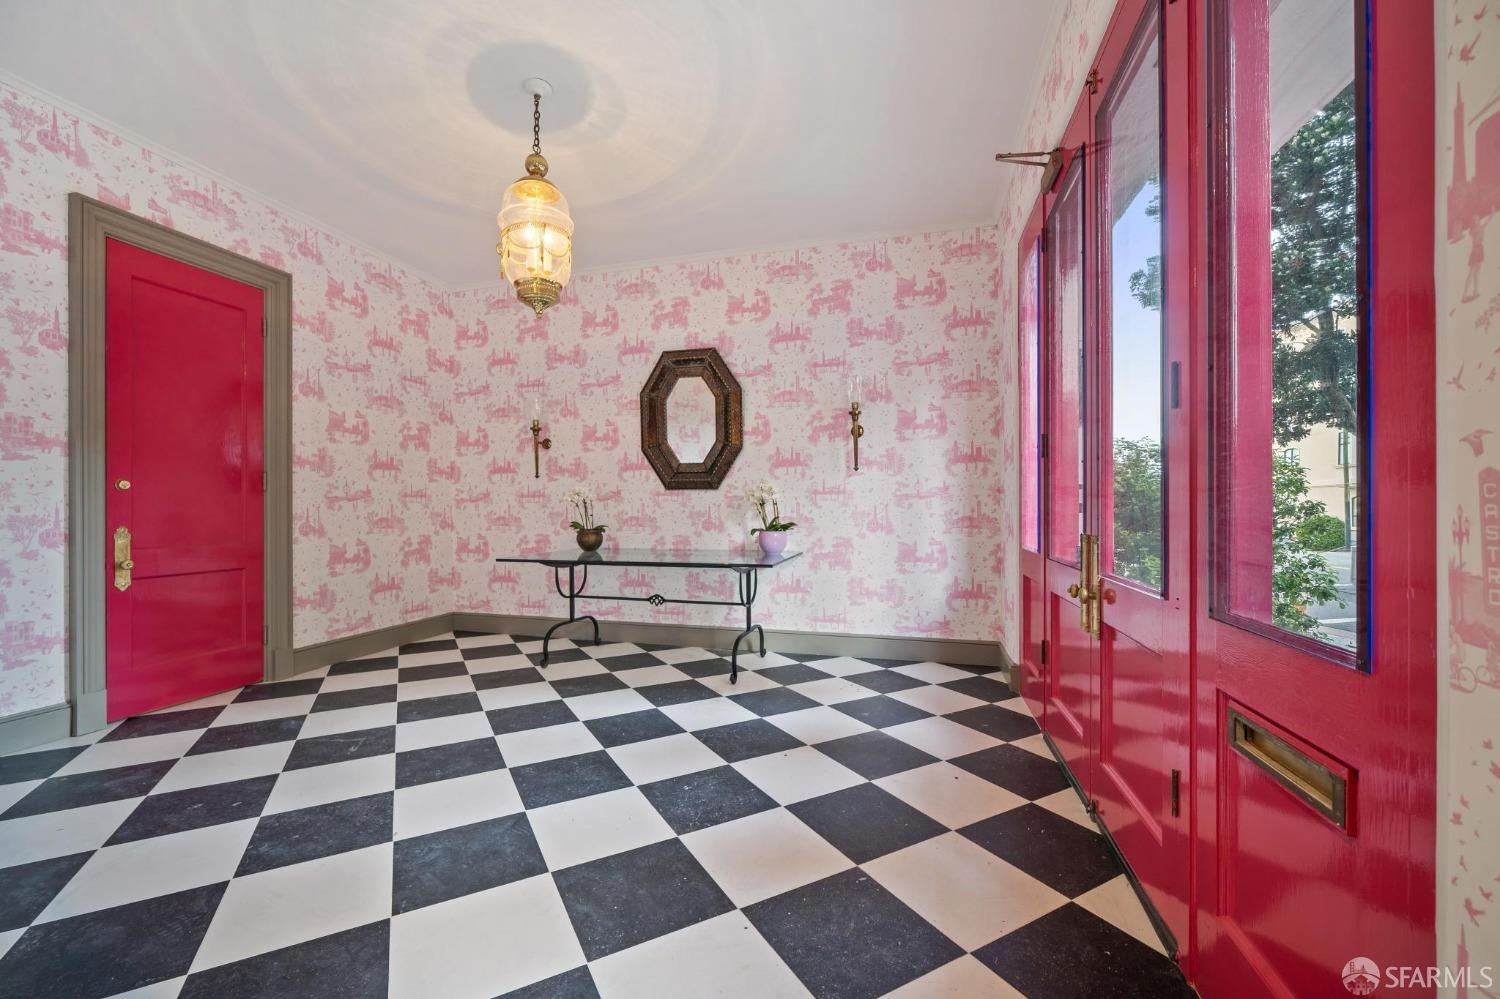 a living room with a black white checkered floor with a black white checkered floor and a rug